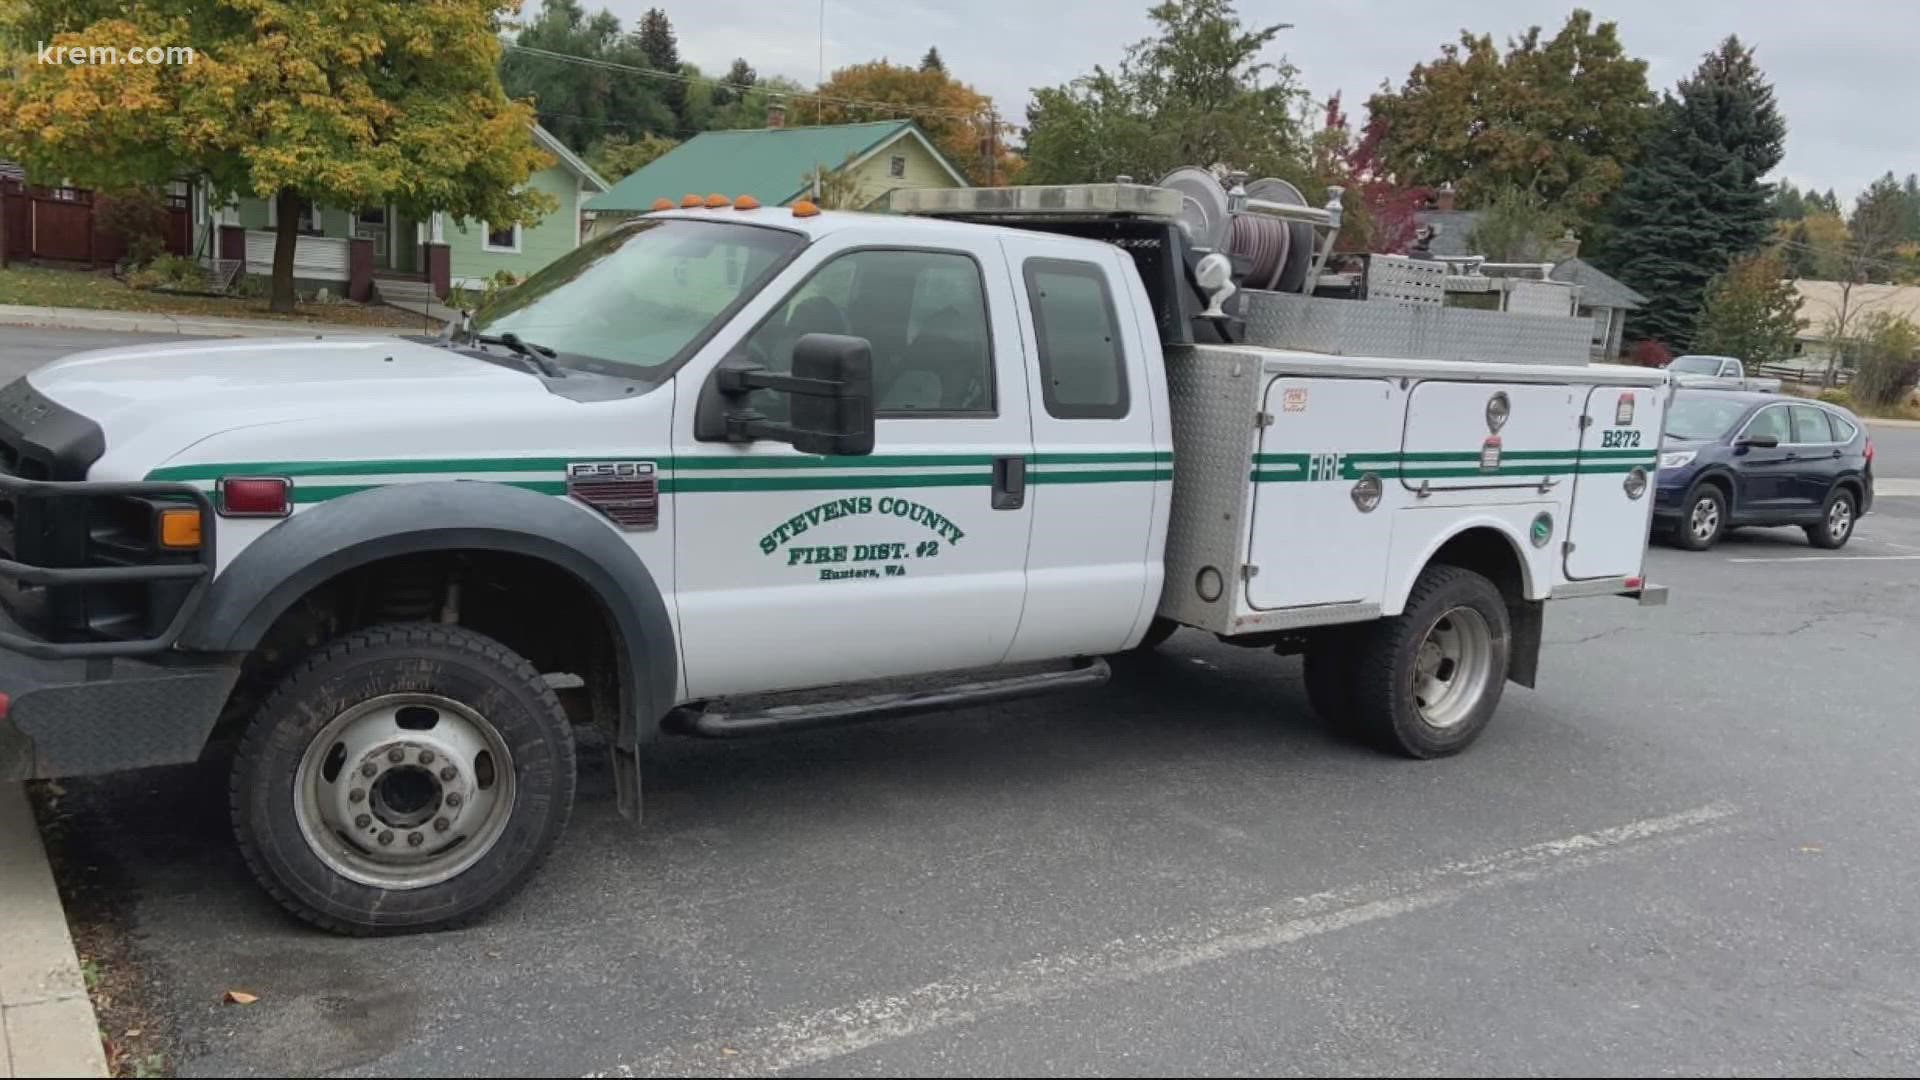 Another truck was reported to be seriously damaged, as its batteries were cut out of their holder and significant amount of equipment was stolen from it.